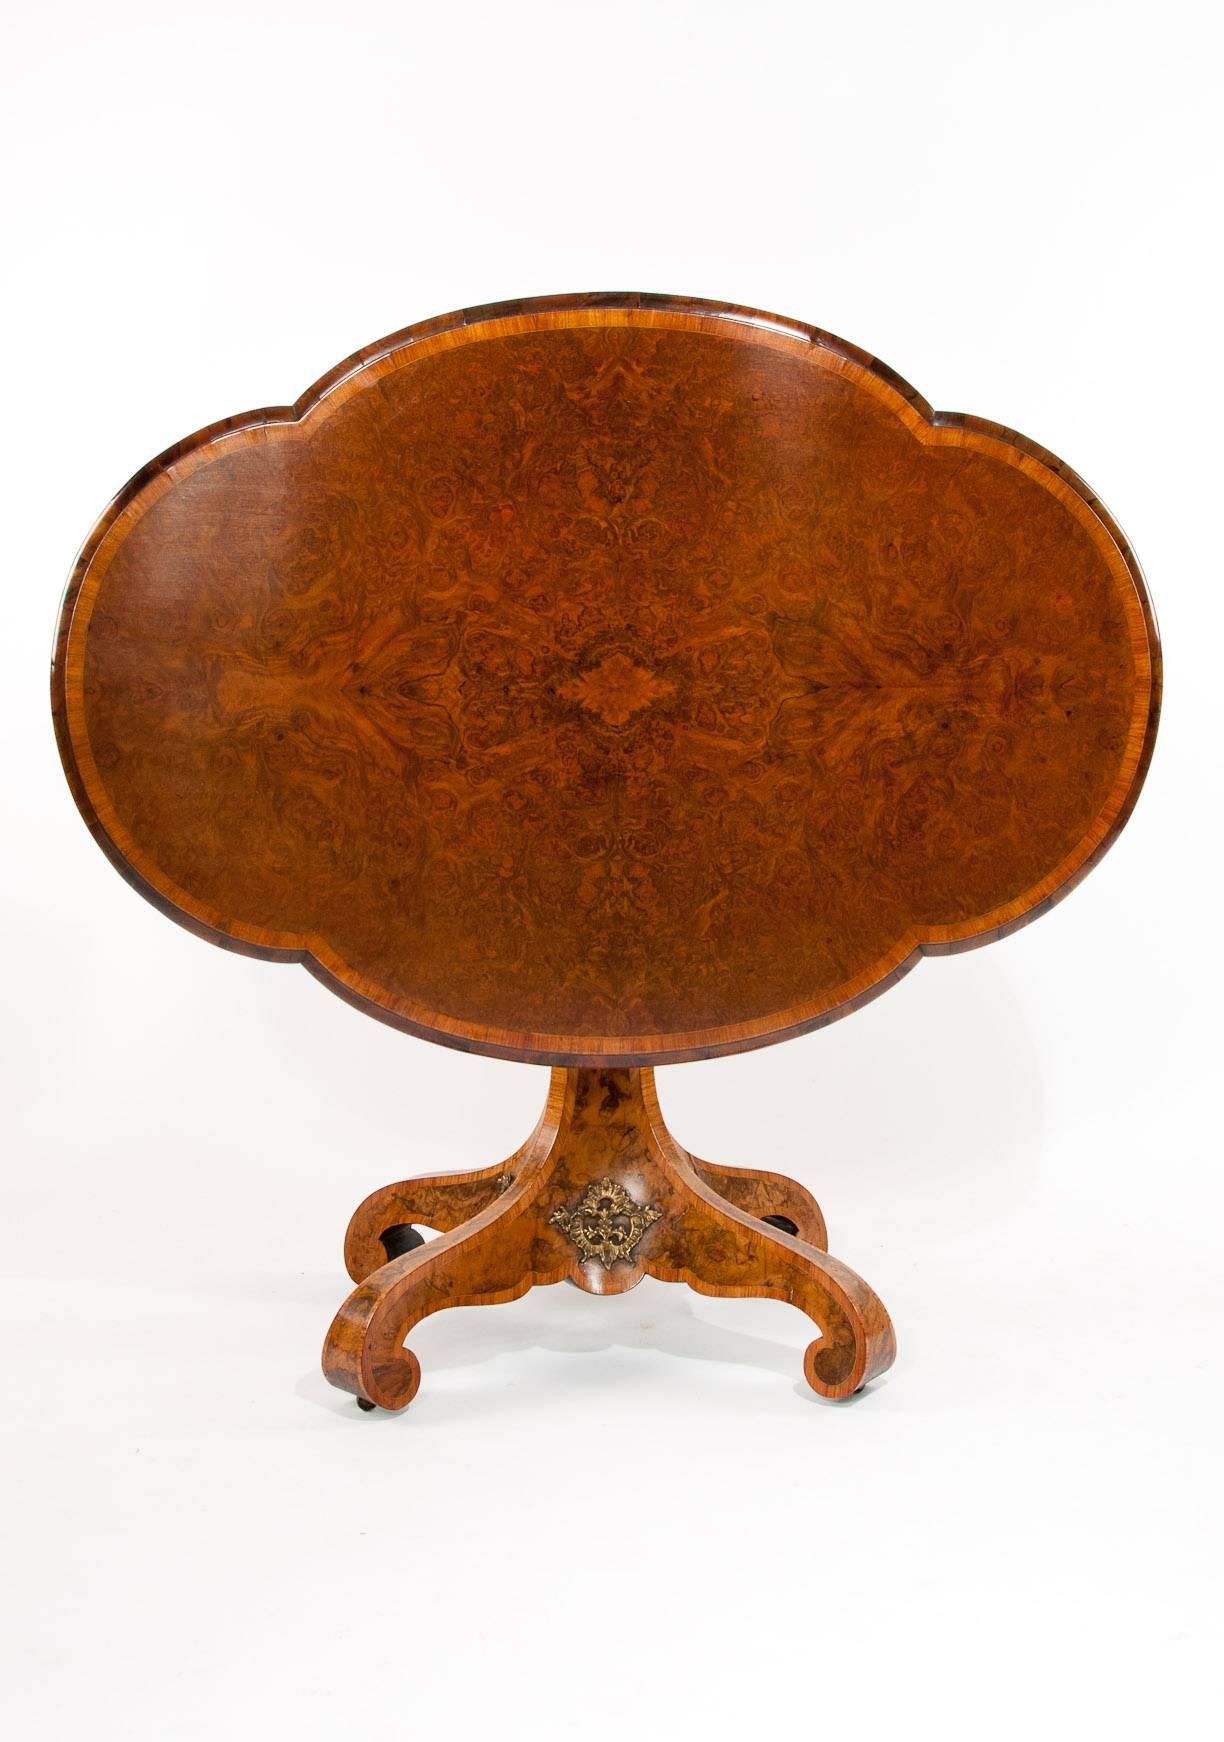 An extremely fine quality and rare shaped 19th Century burr walnut center table dating to circa 1850 in the manner of Edward Holmes Baldock This excellent quality center table has a stunning burr walnut quarter veneered top which when laid in this